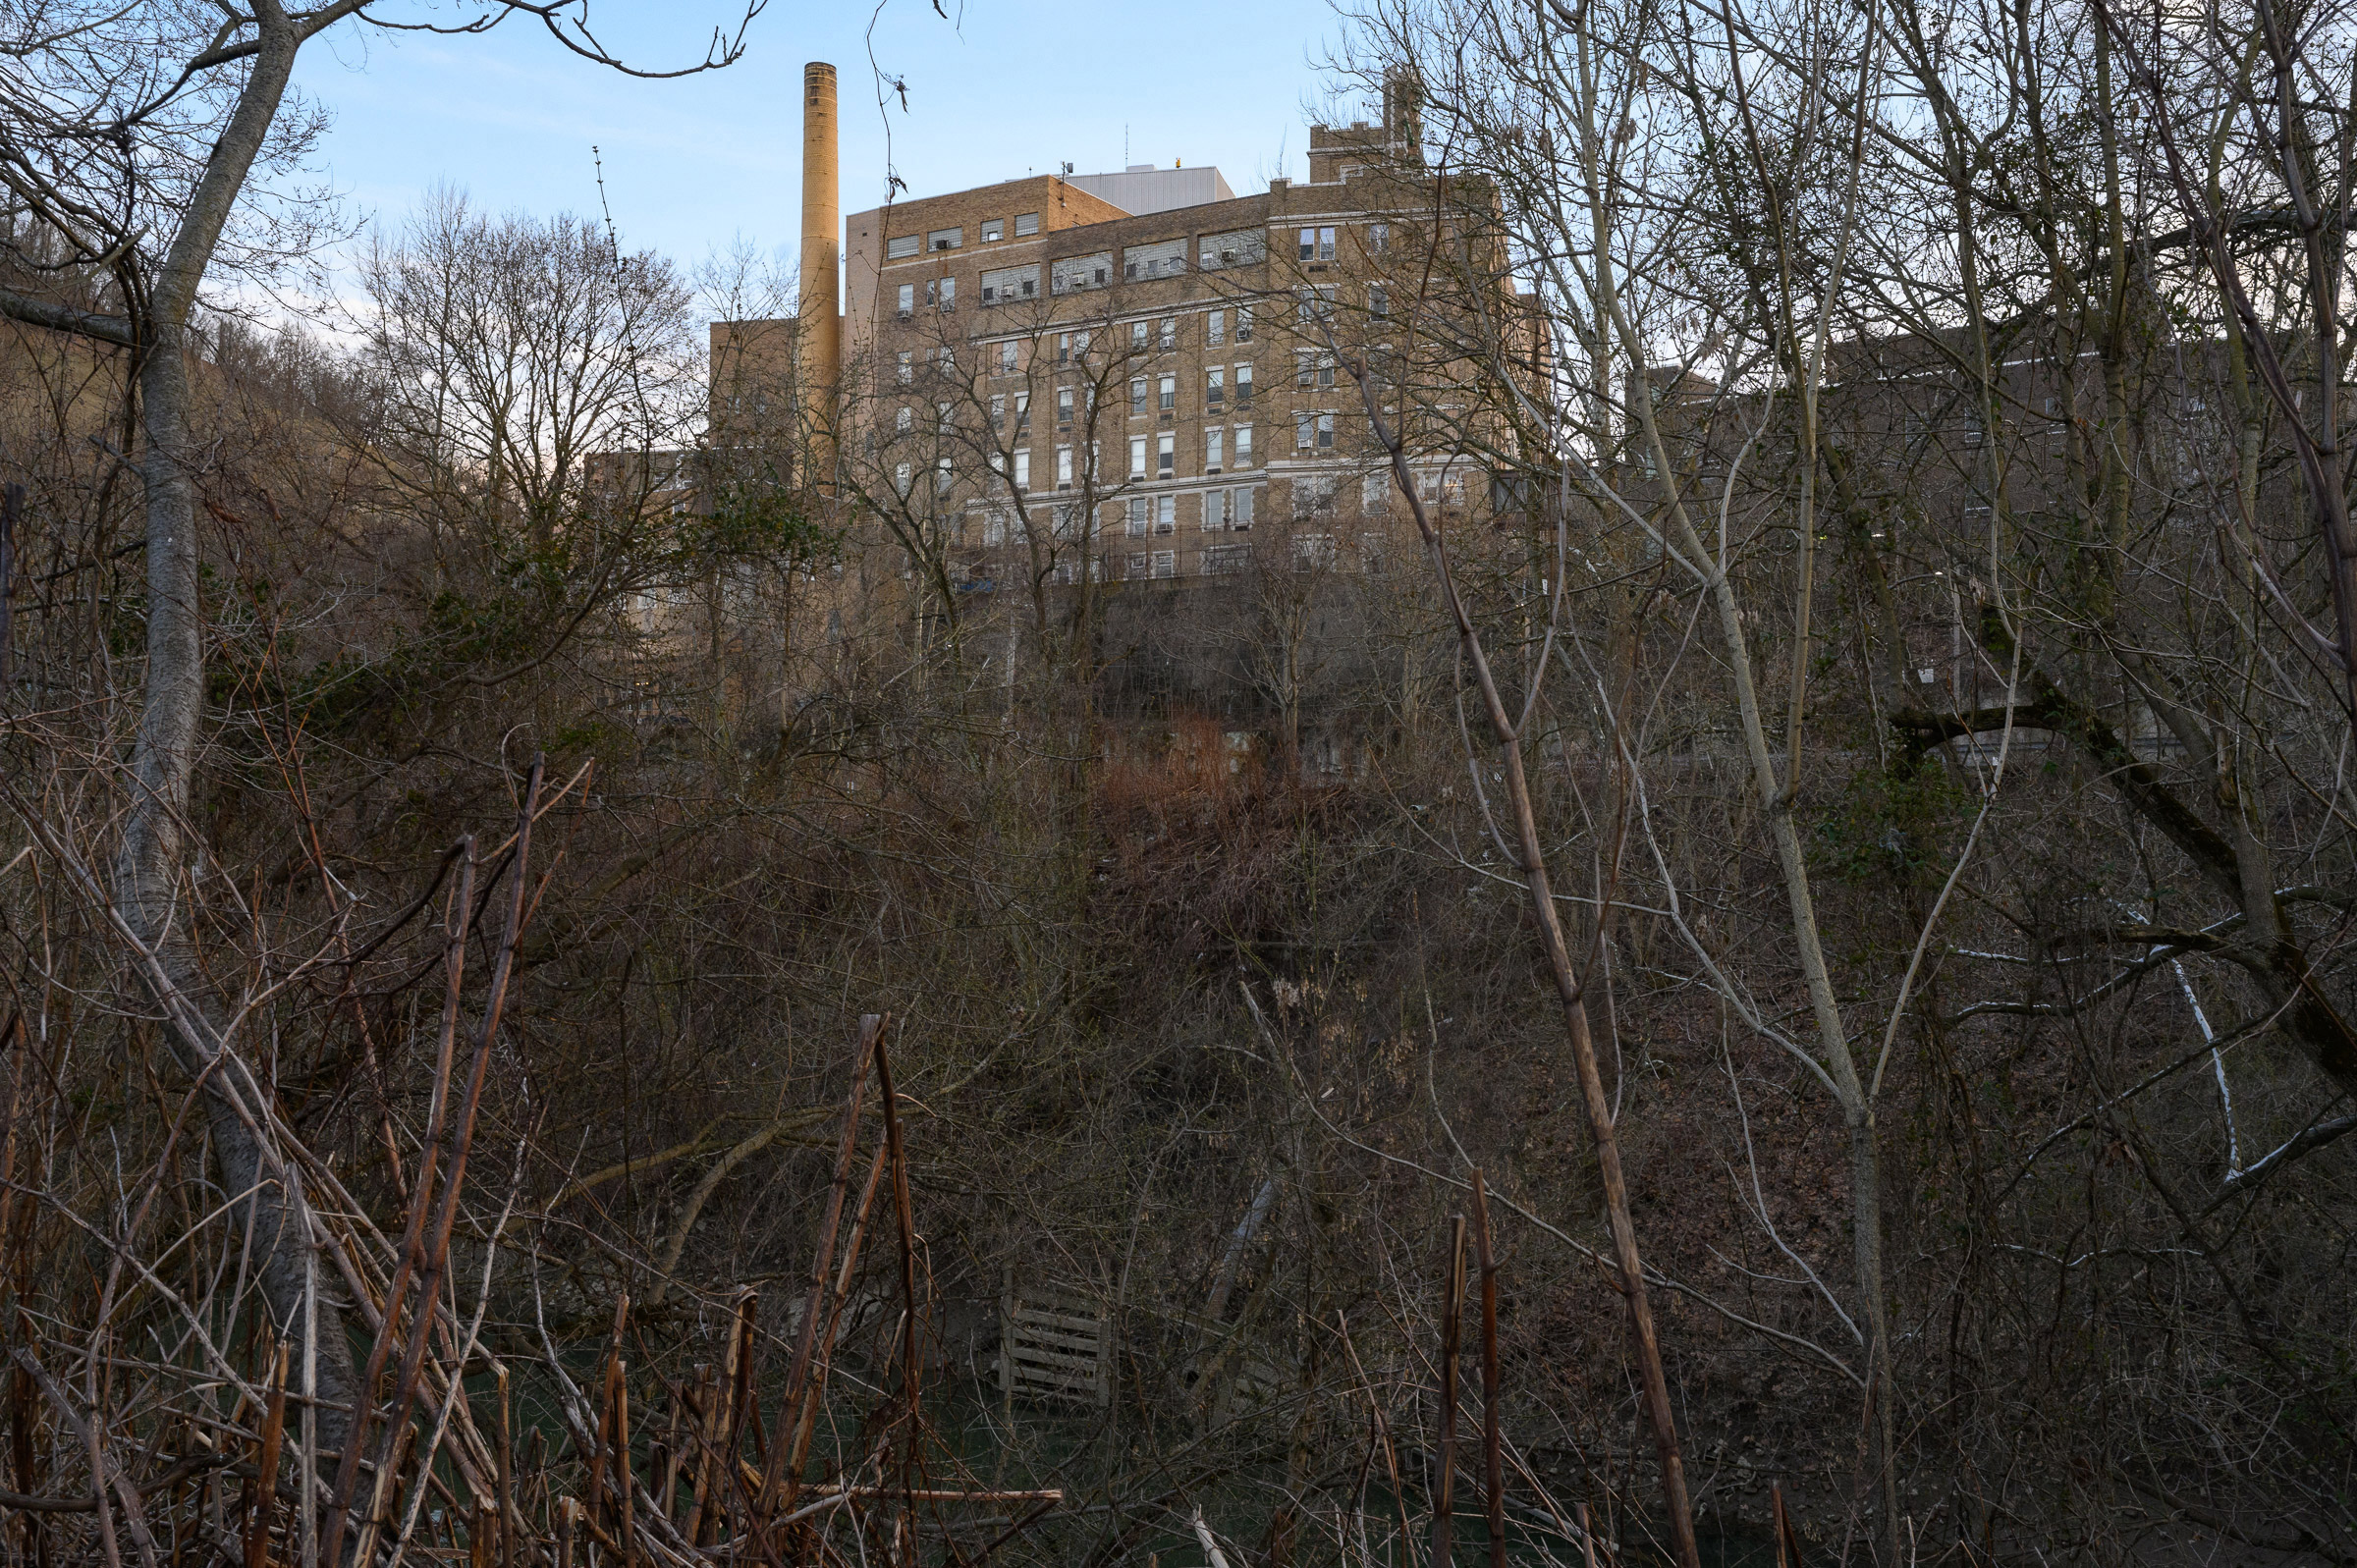 A view of the Ohio Valley Medical Center that closed in 2019, seen from the former encampments along Wheeling Creek in March. (Rebecca Kiger)